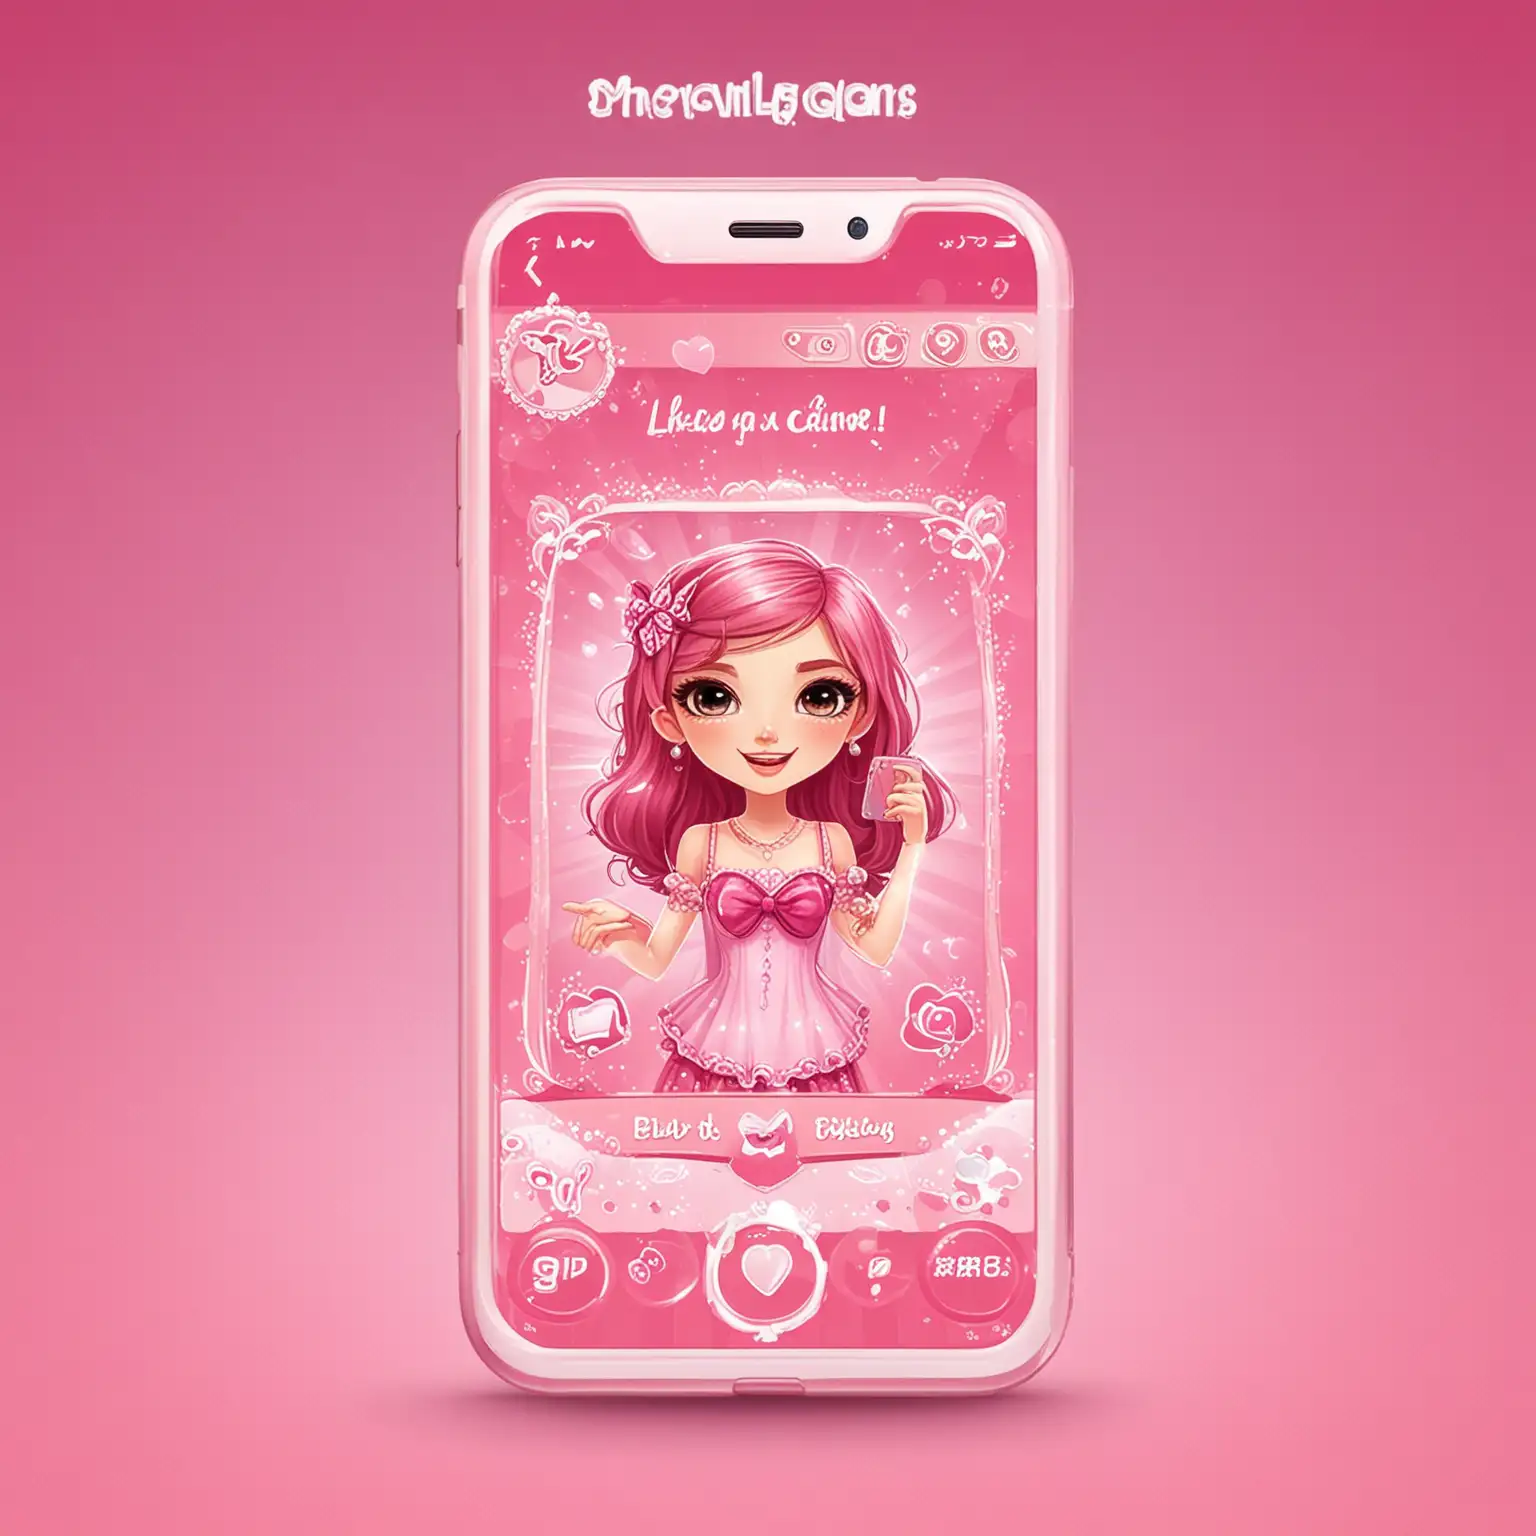 Girly Mobile Phone Game Screen with Vibrant Graphics